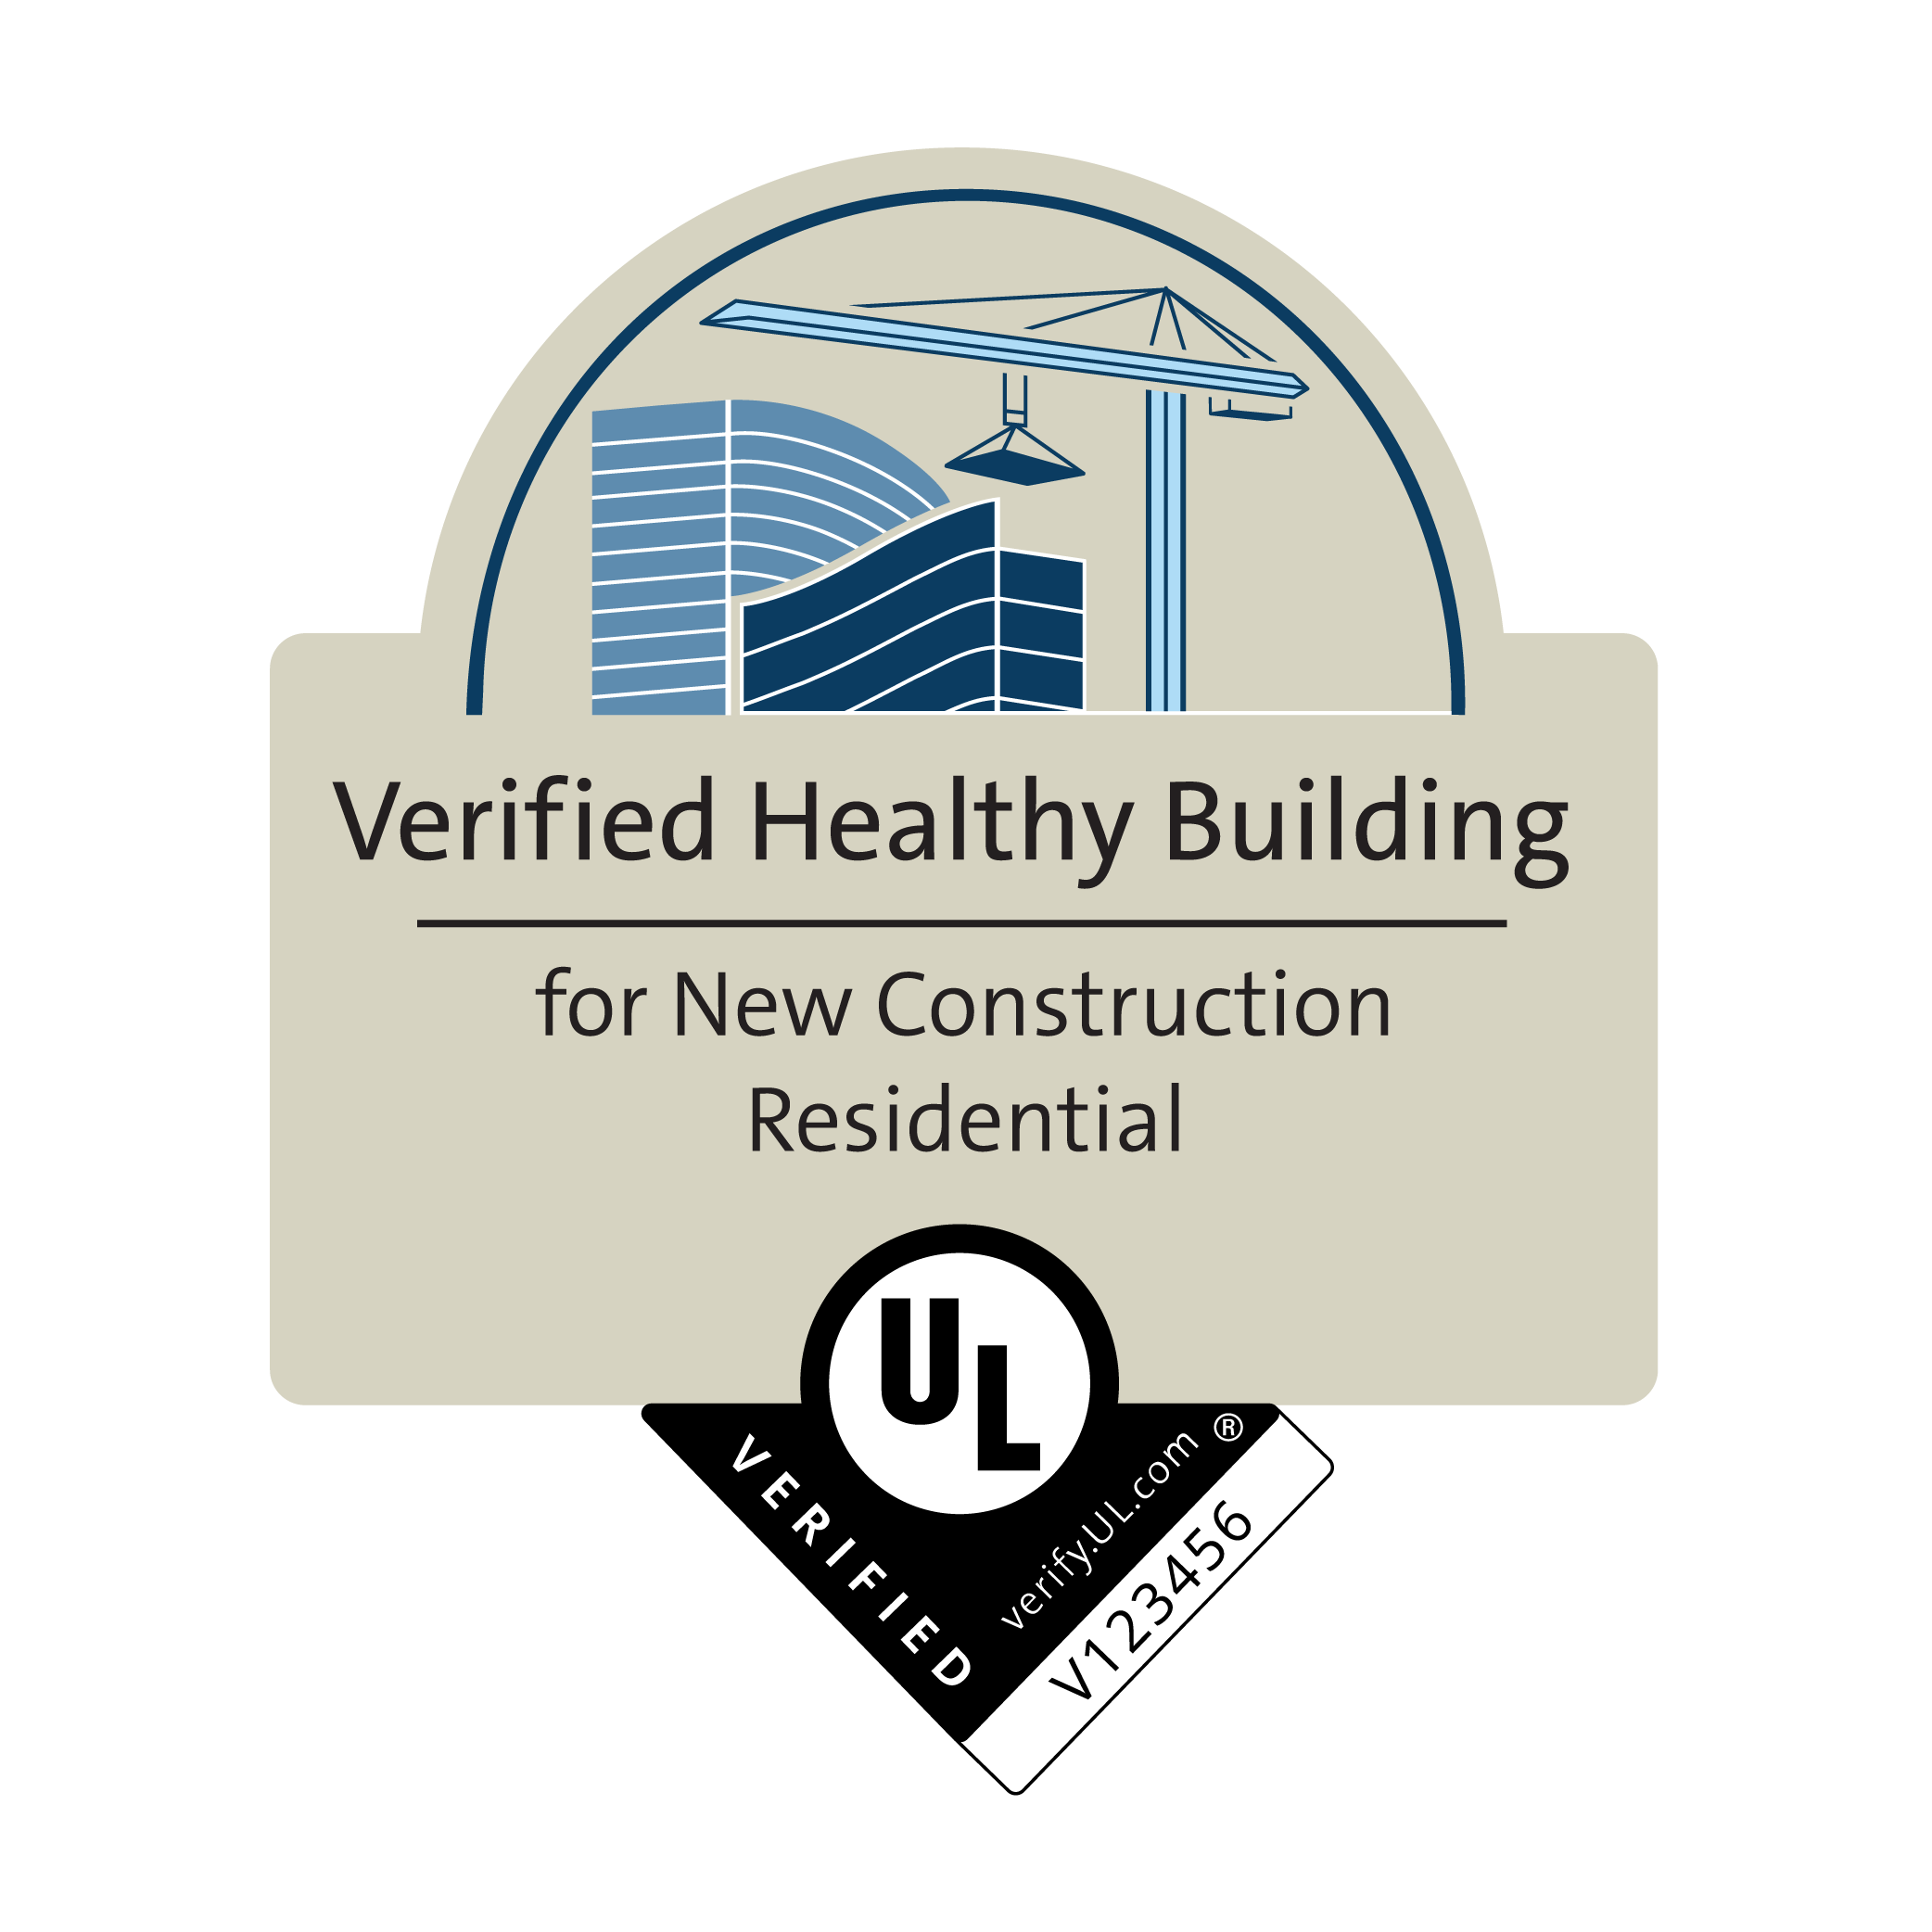 UL Verified Healthy Building for New Construction Residential; 新住宅建築的 UL 健康建築驗證